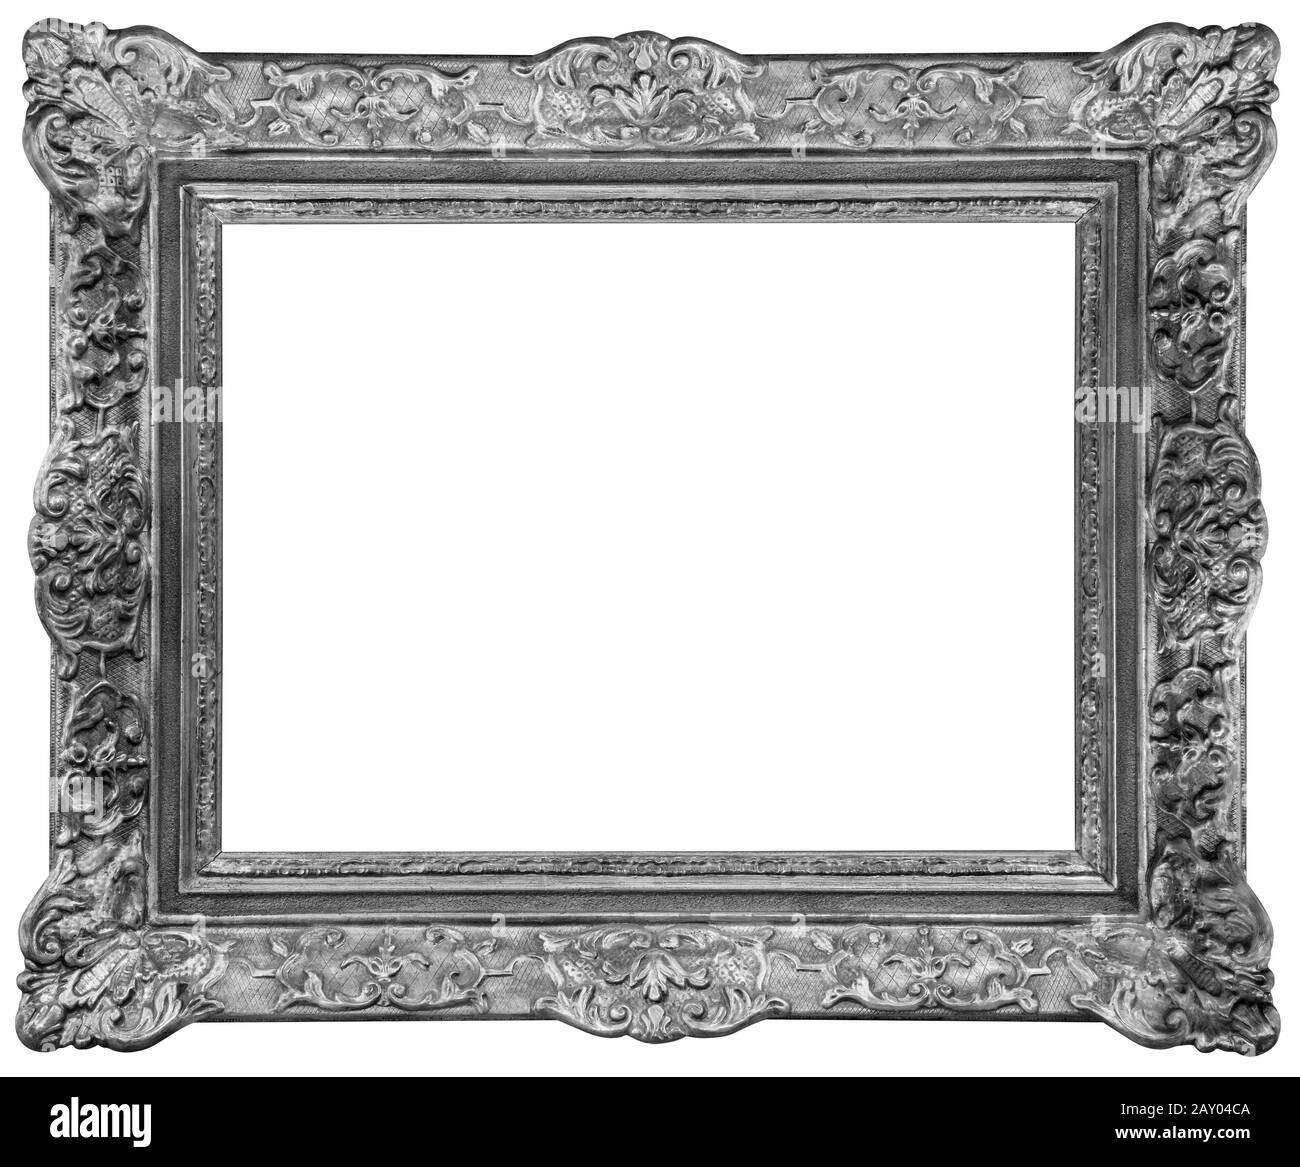 Rectangle Old silver-plated wooden frame isolated on white background Stock Photo